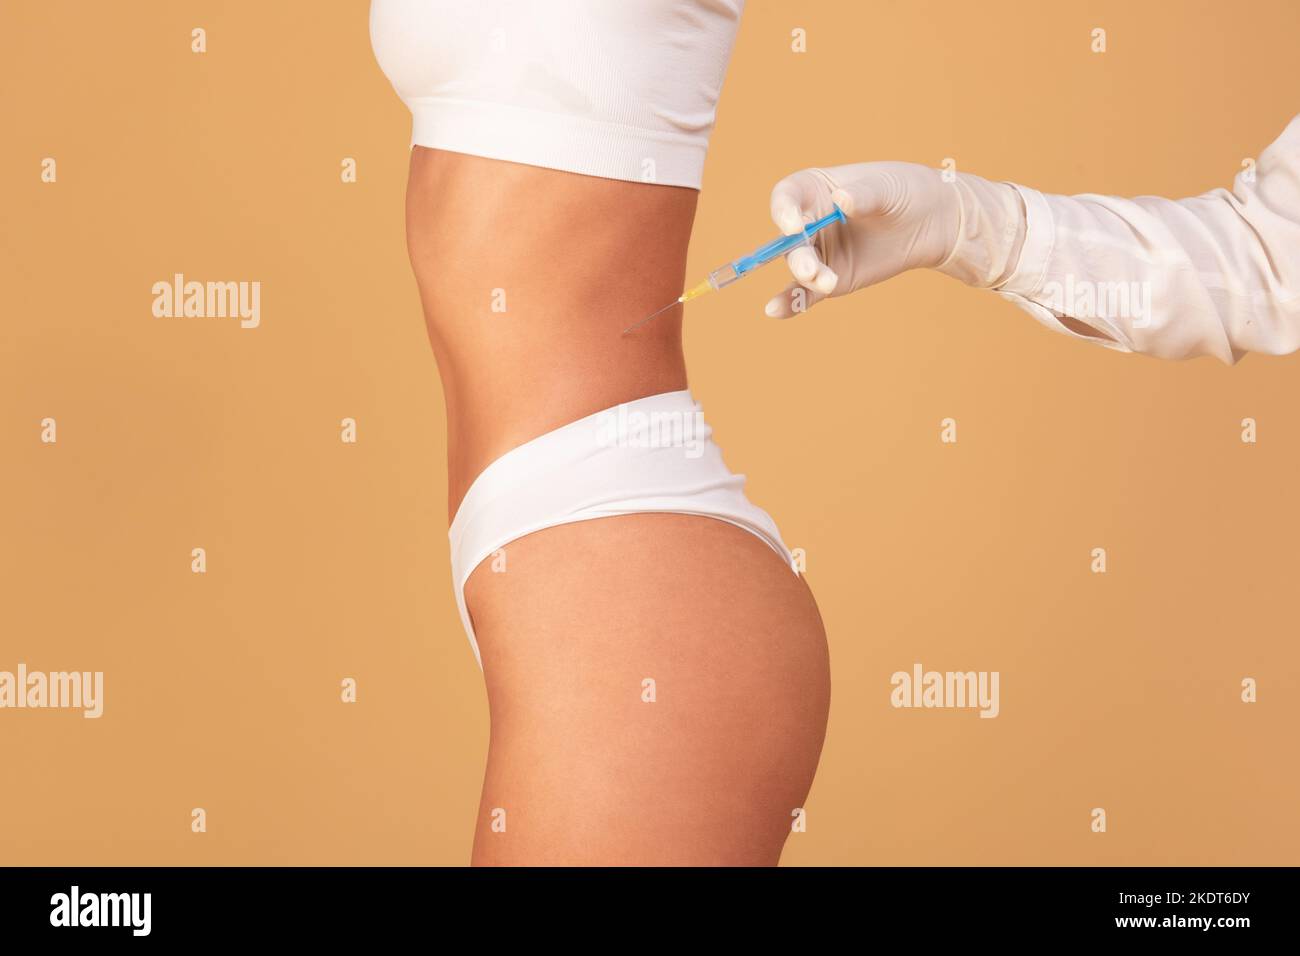 Beauty treatment concept. Cropped view of young fit woman getting injection in belly area, having procedure in salon Stock Photo